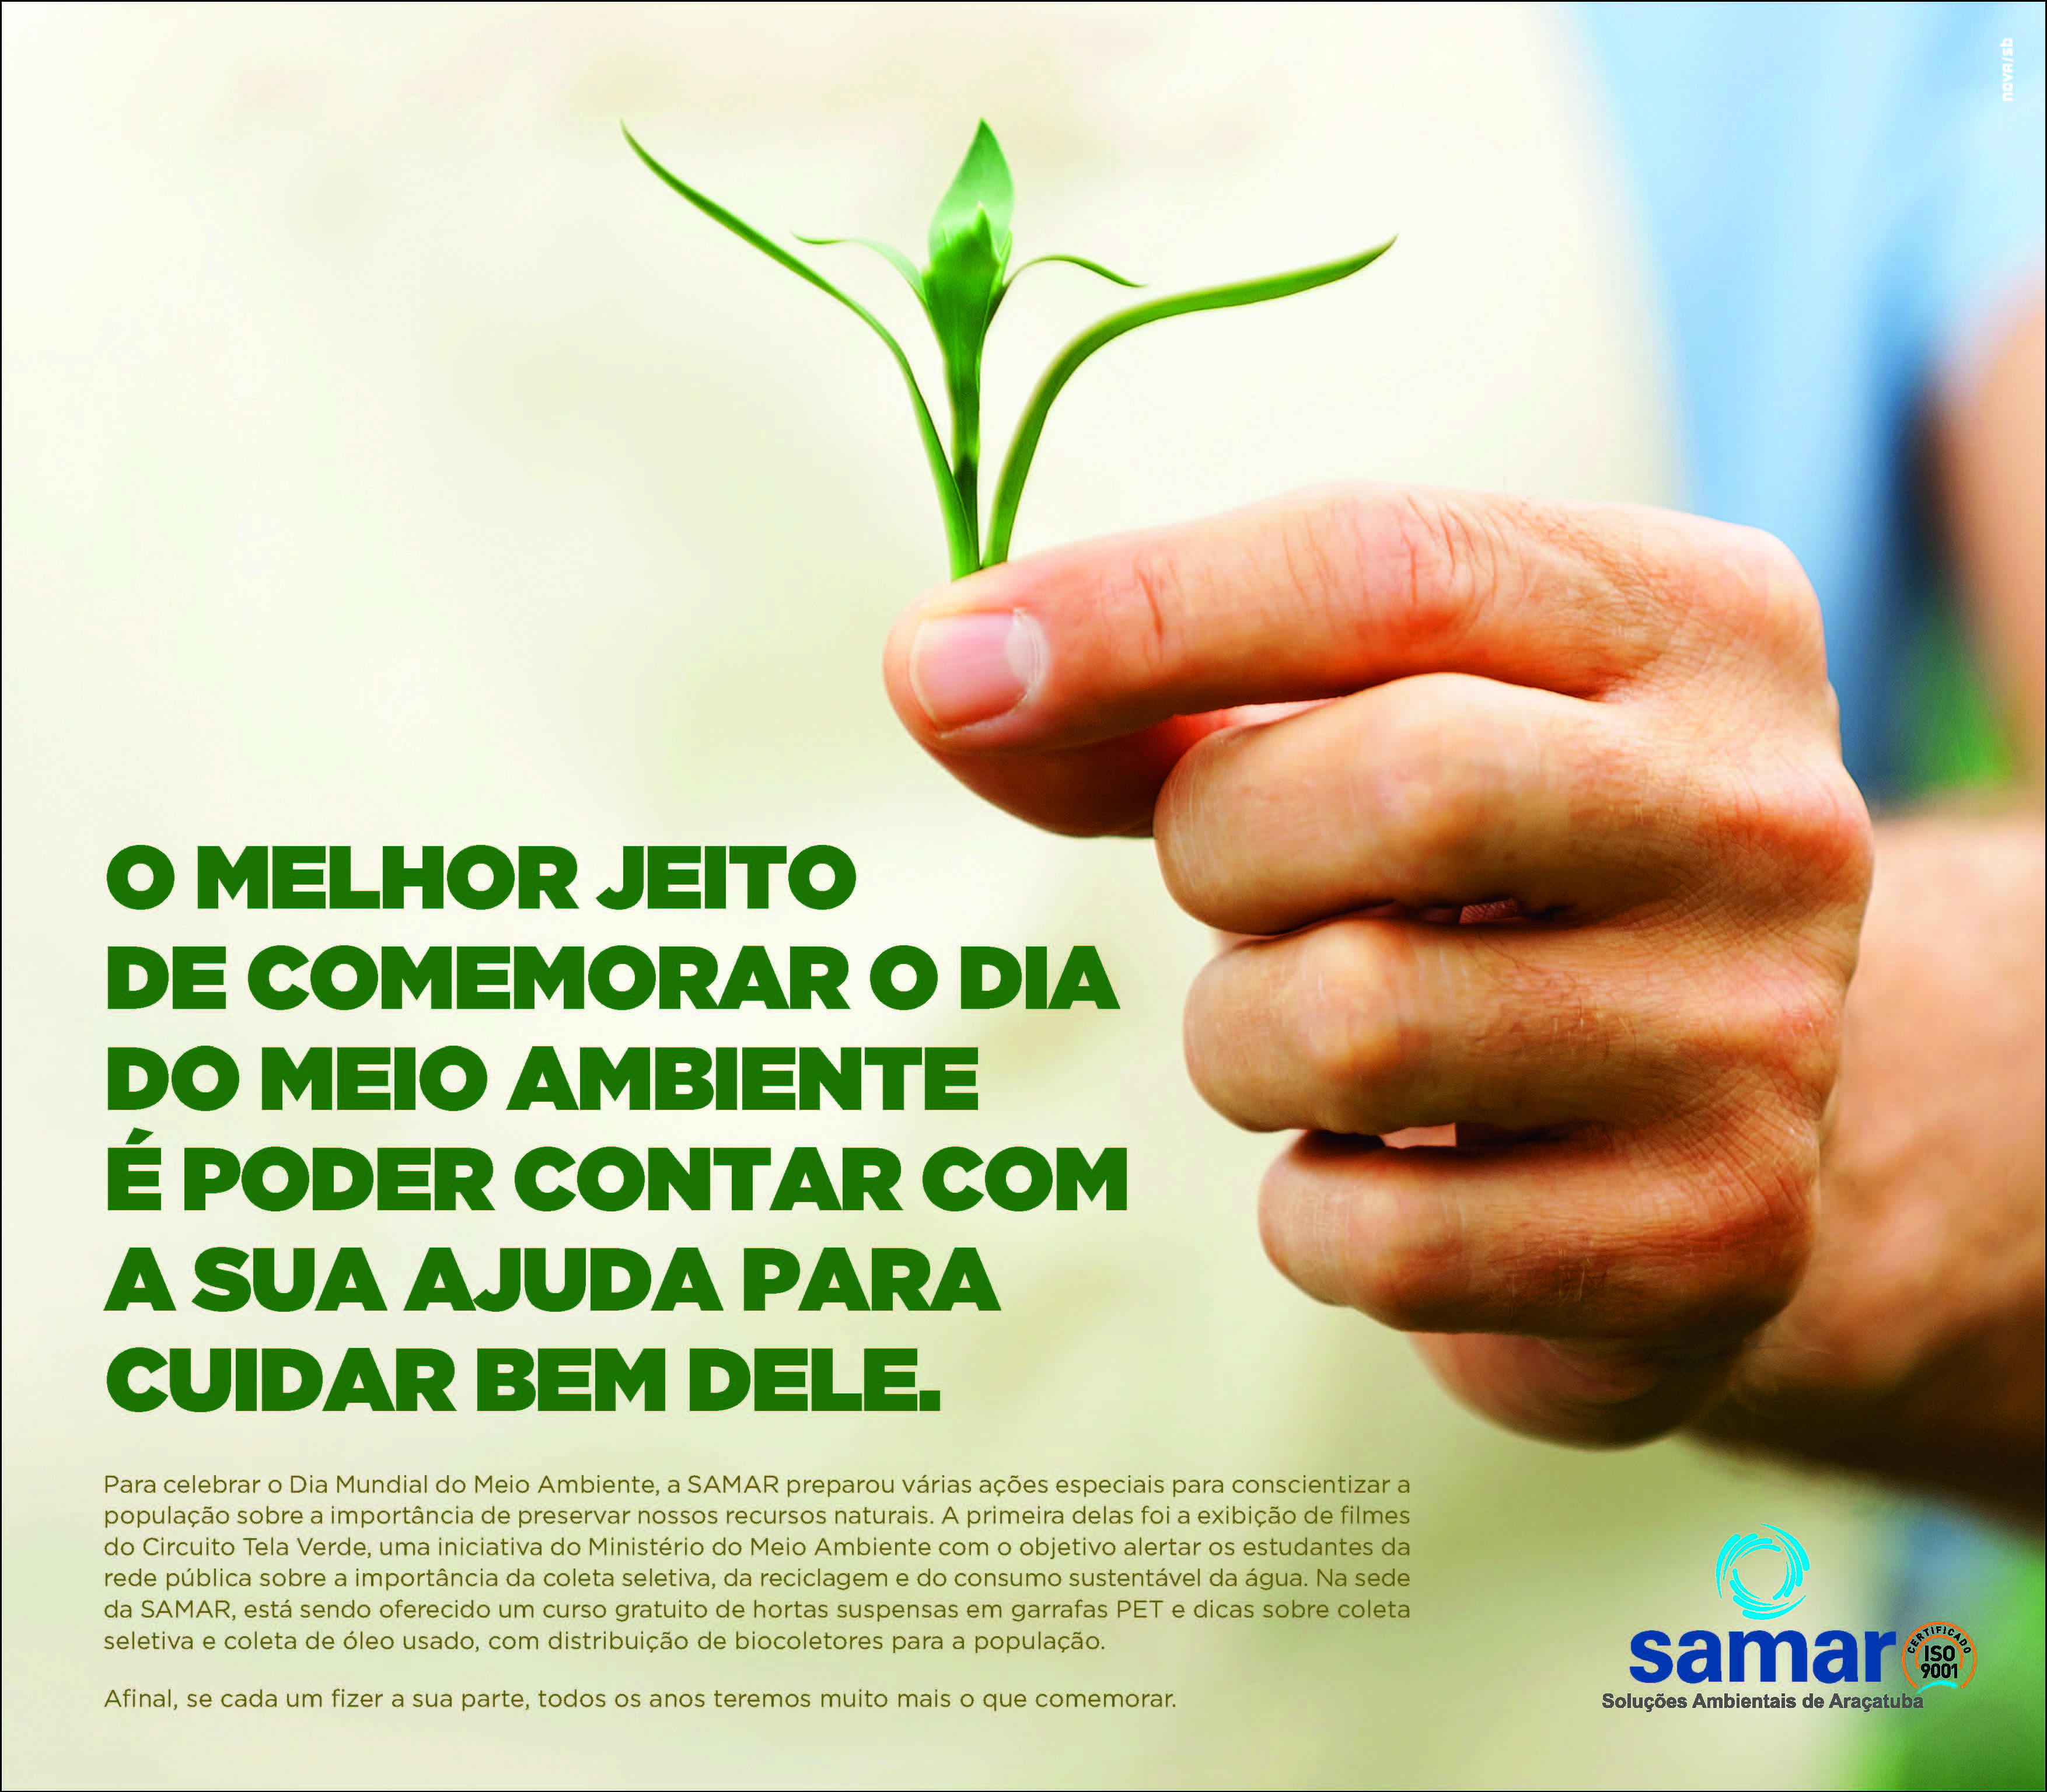 Featured image for “Dia Mundial do Meio Ambiente”